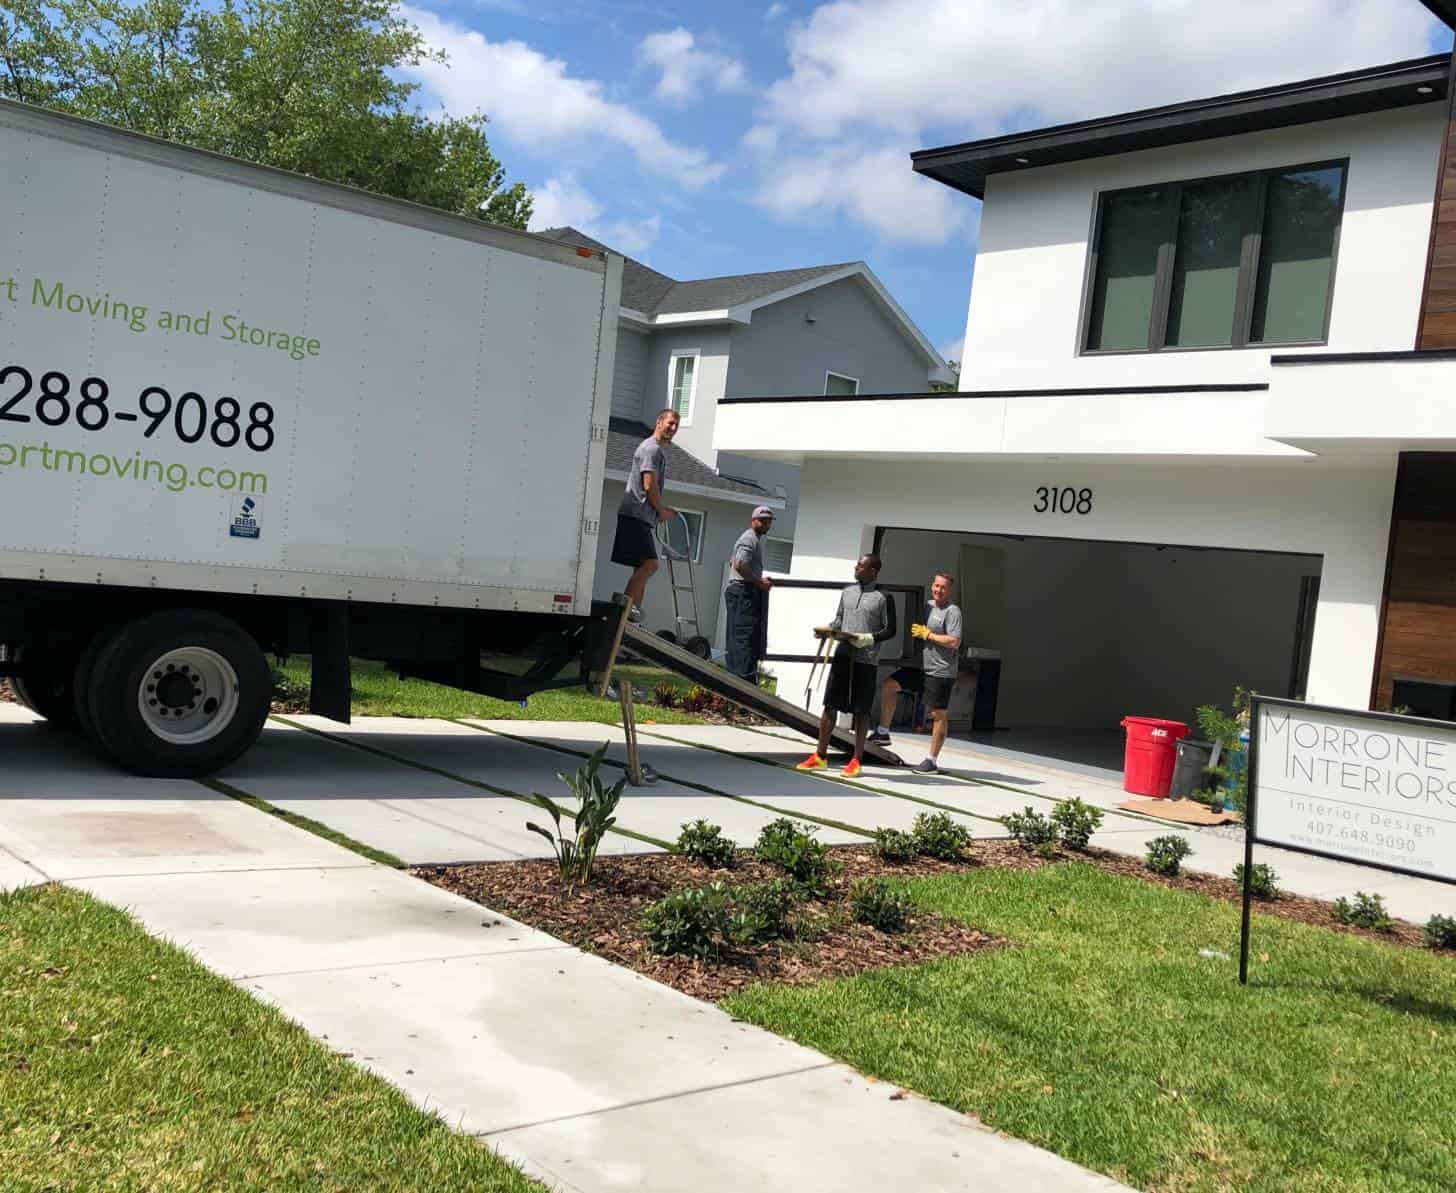 Teleport Moving and Storage | Central Florida Moving Company